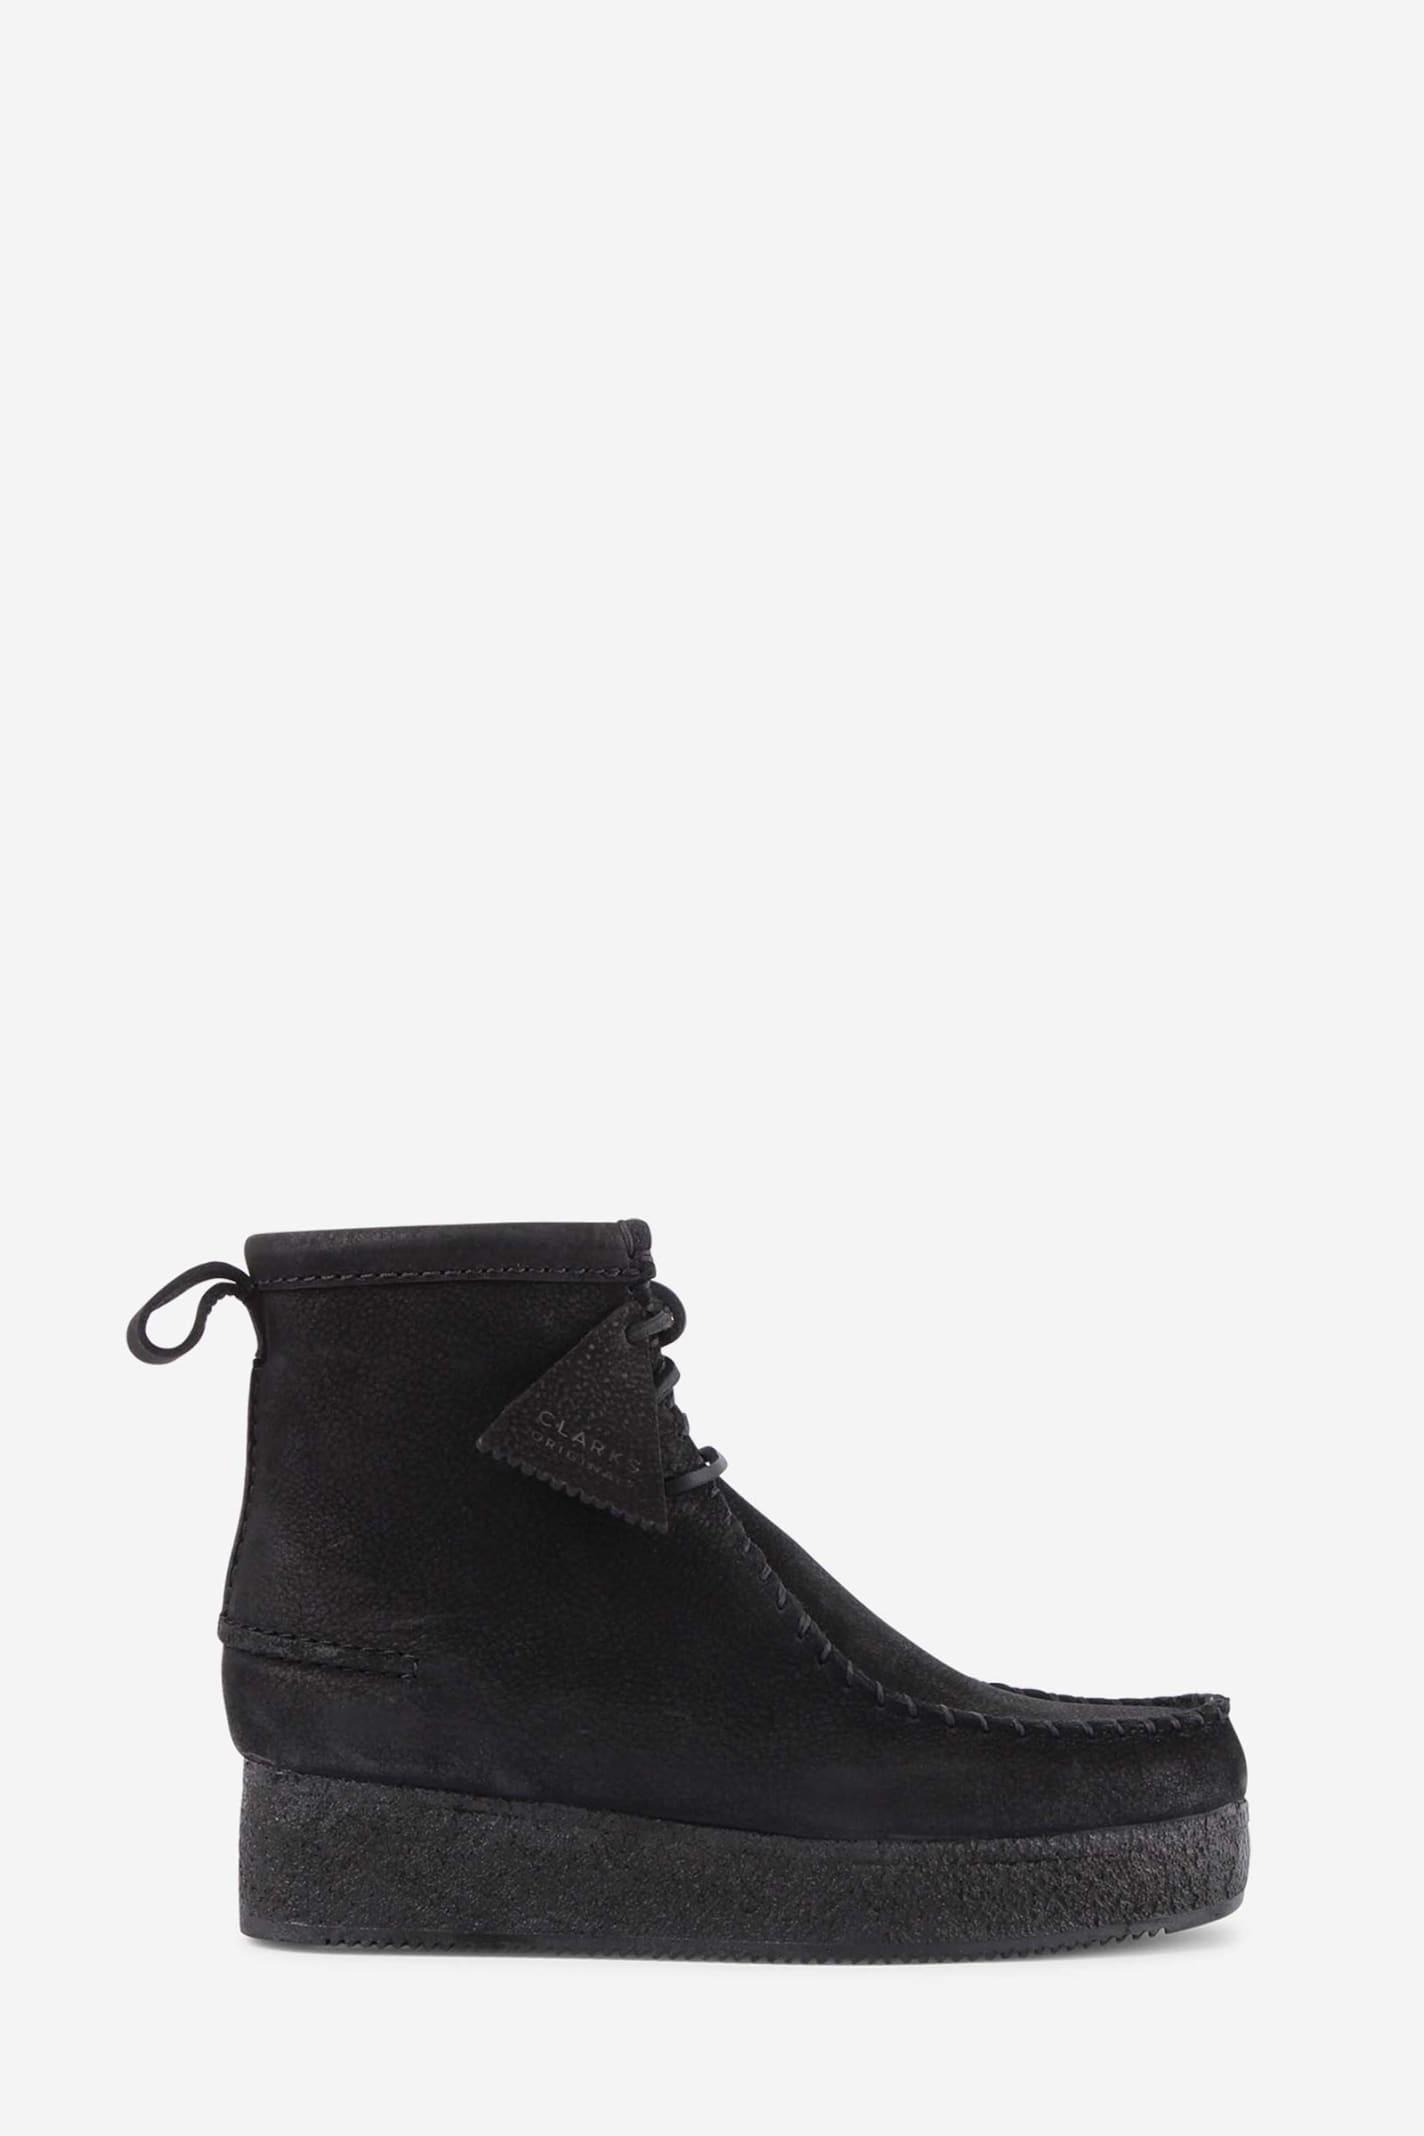 Clarks Wallabee Craft Boots in Black | Lyst